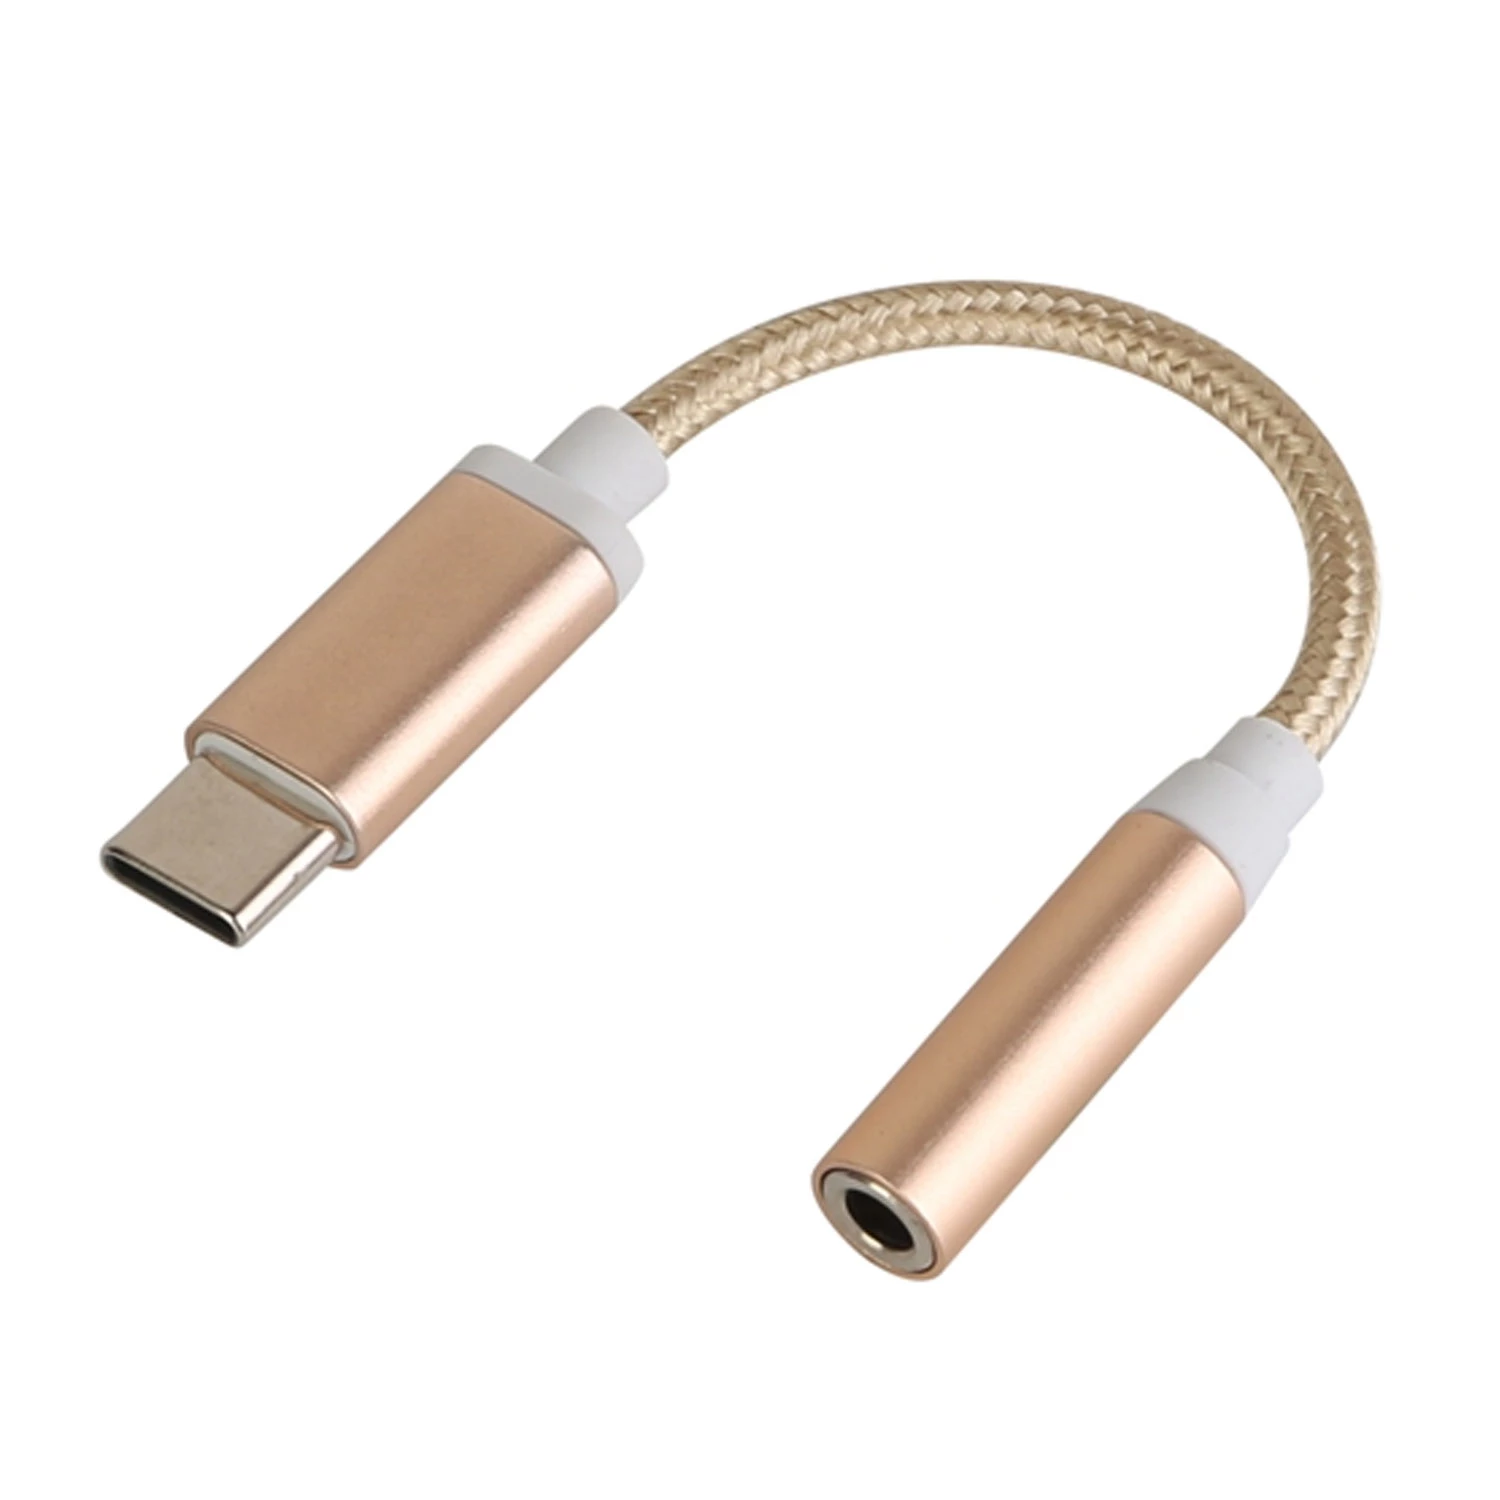 USB-C Type C Adapter Port to 3.5mm Aux Audio Jack Earphone Headphone Cable Cord